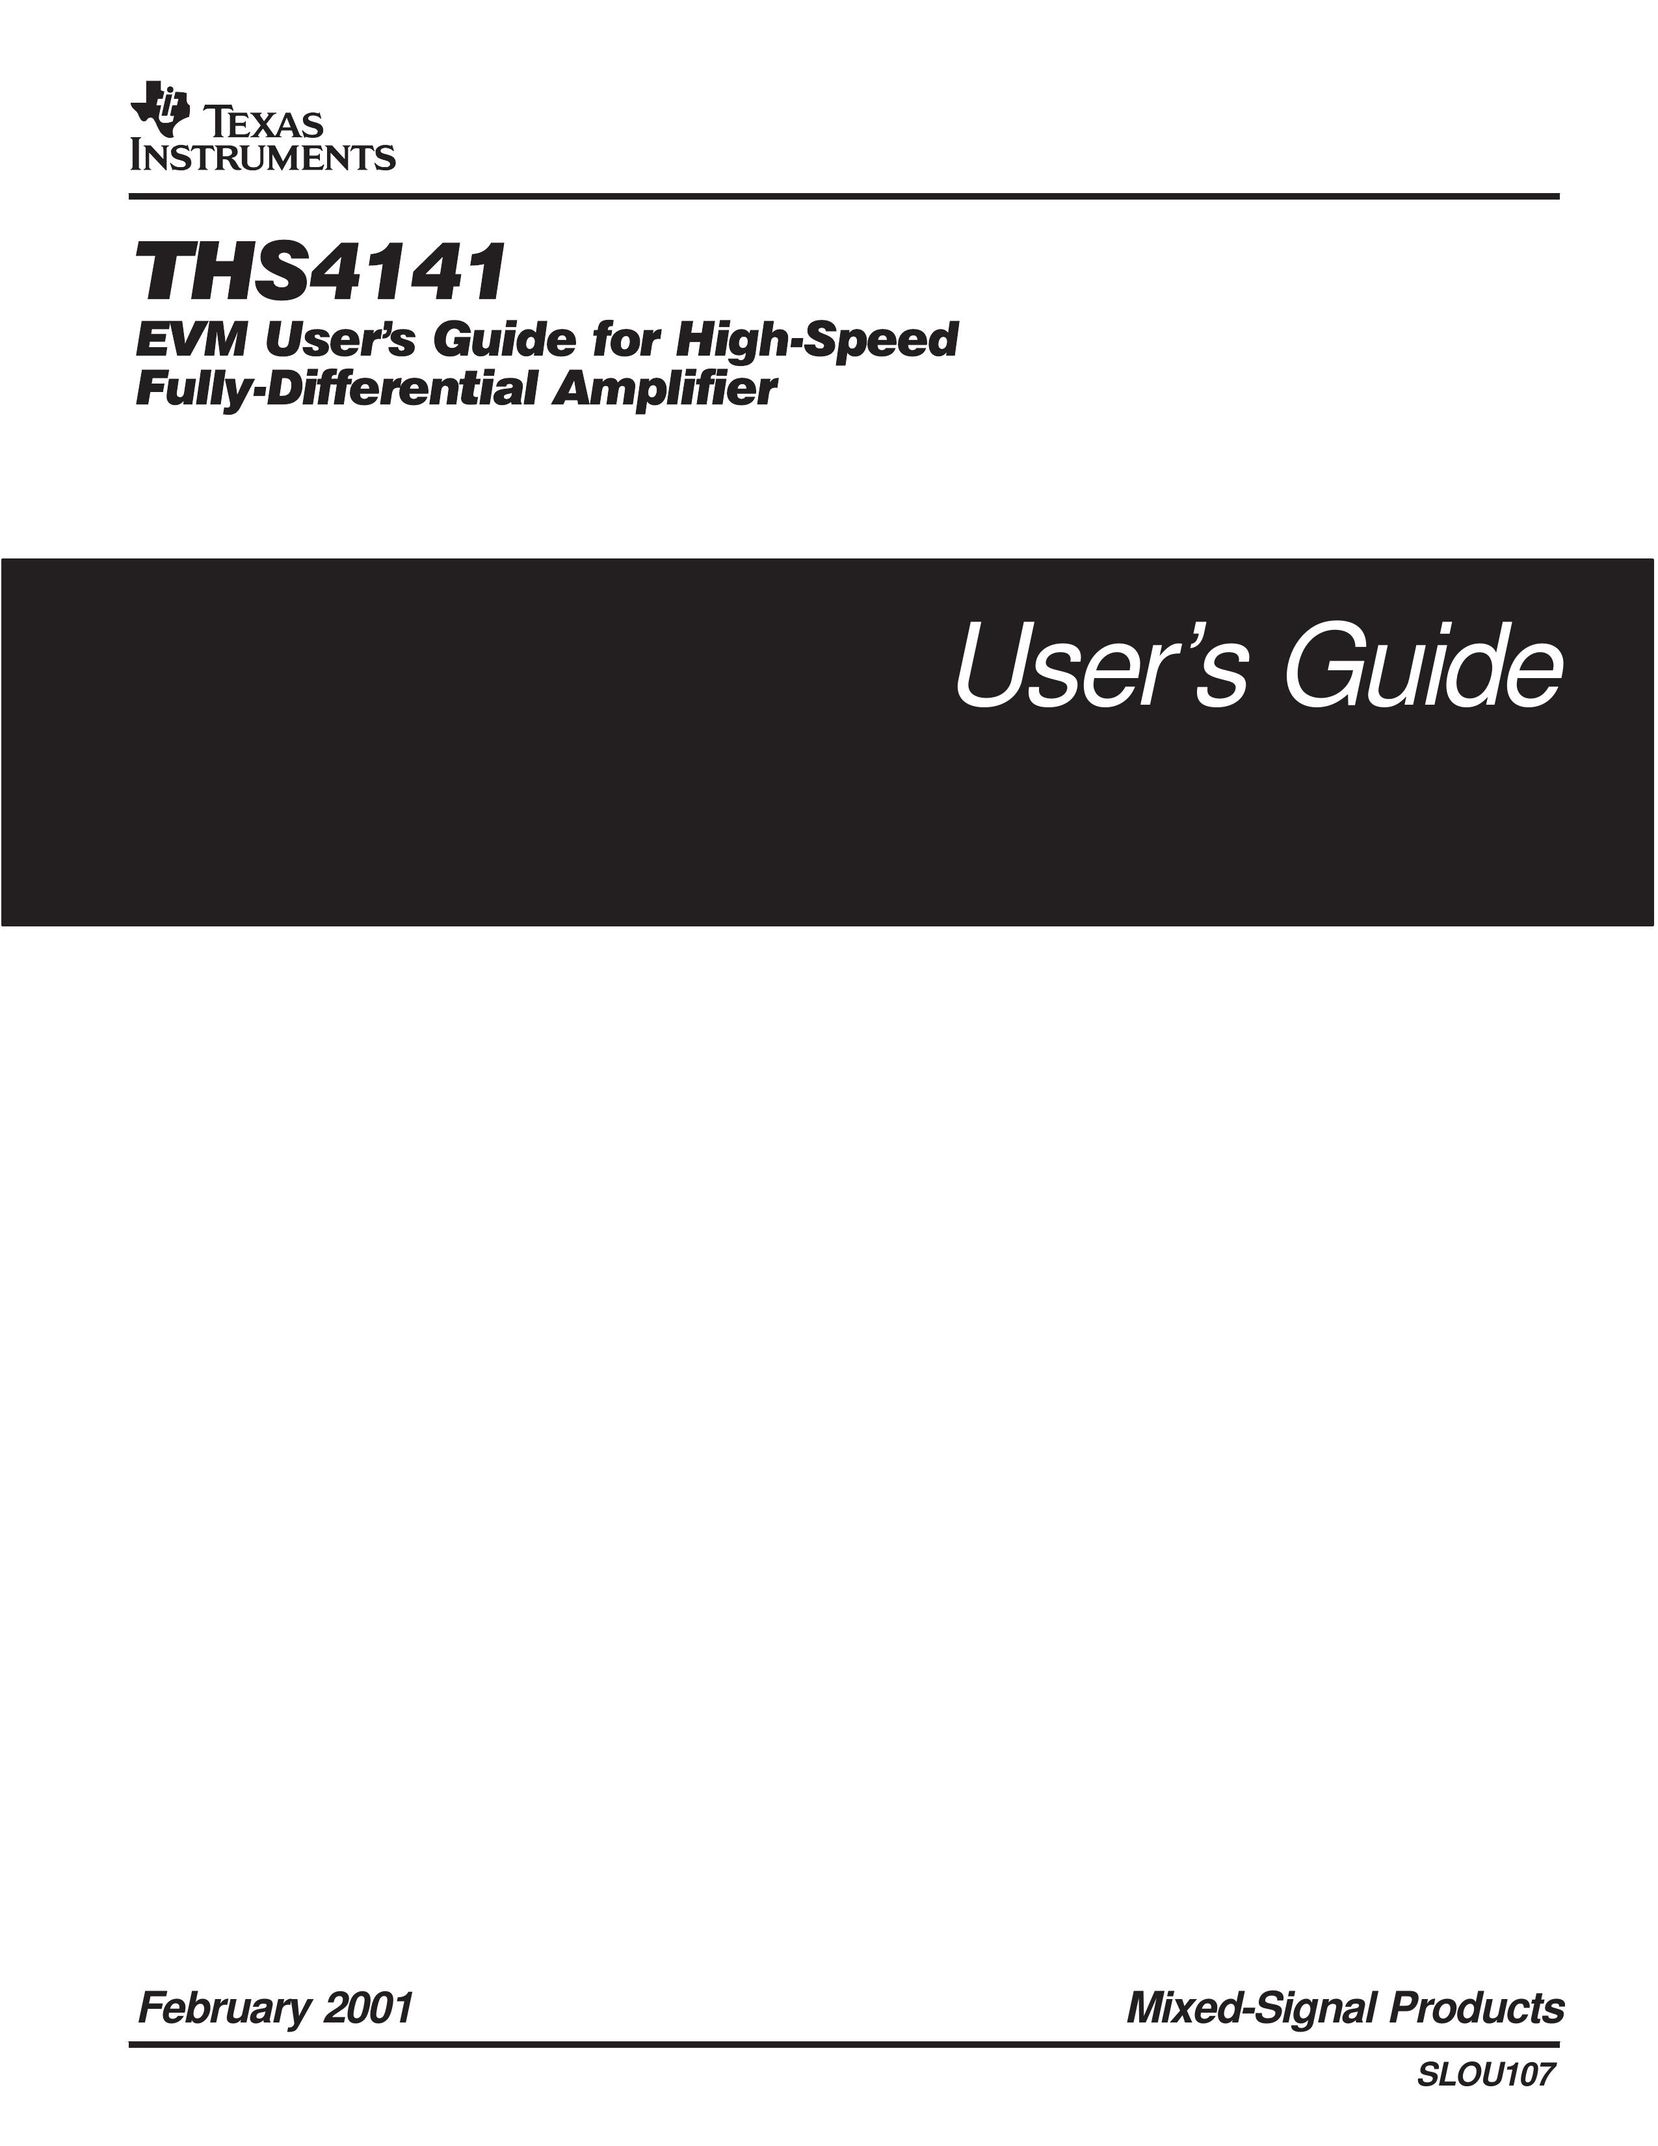 Texas Instruments THS4141 Stereo Amplifier User Manual